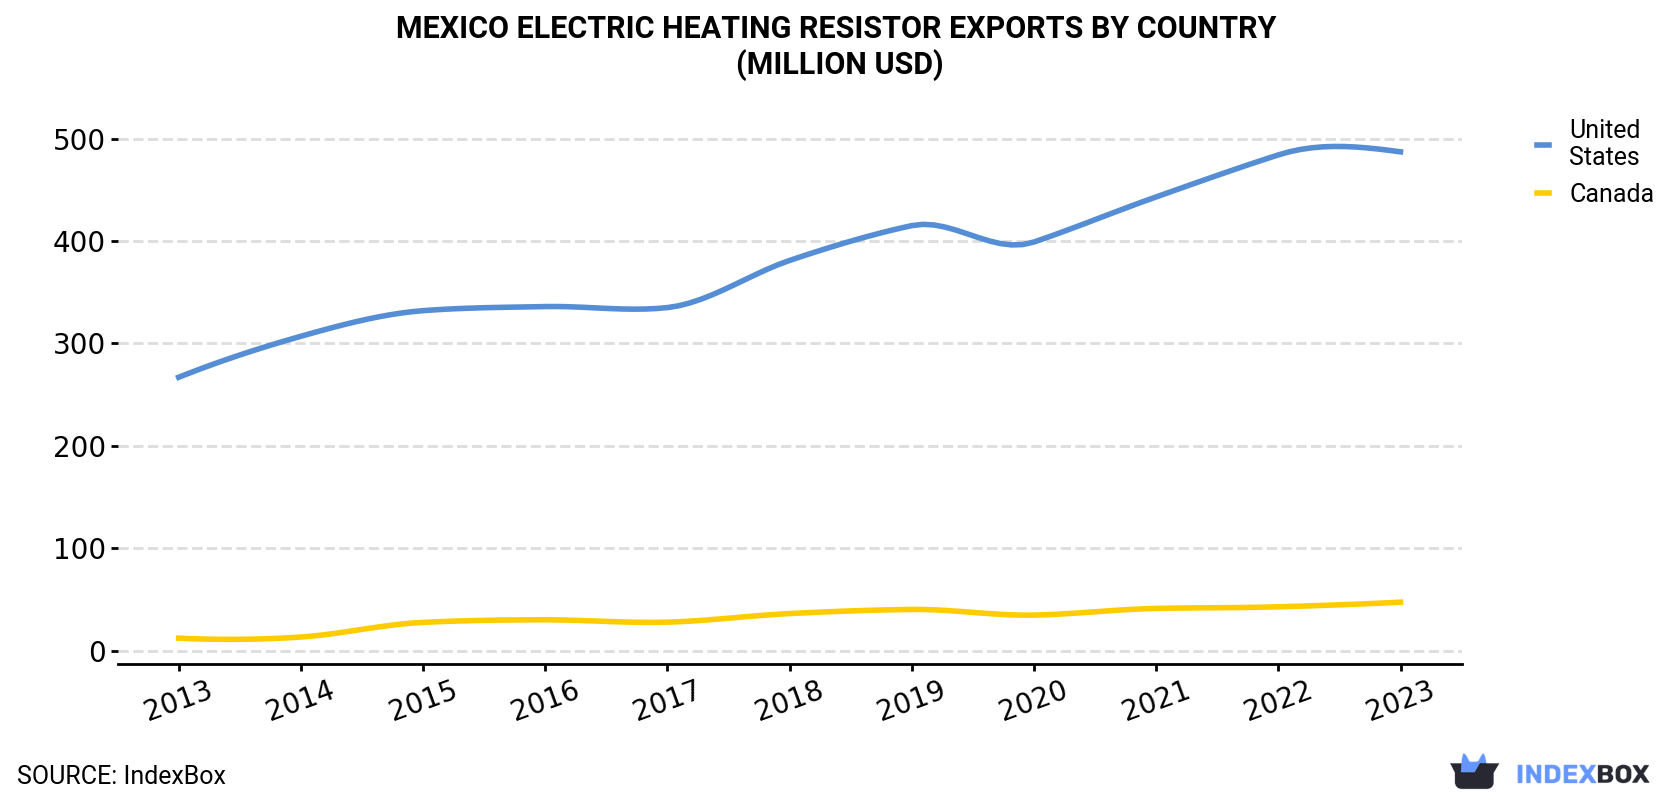 Mexico Electric Heating Resistor Exports By Country (Million USD)